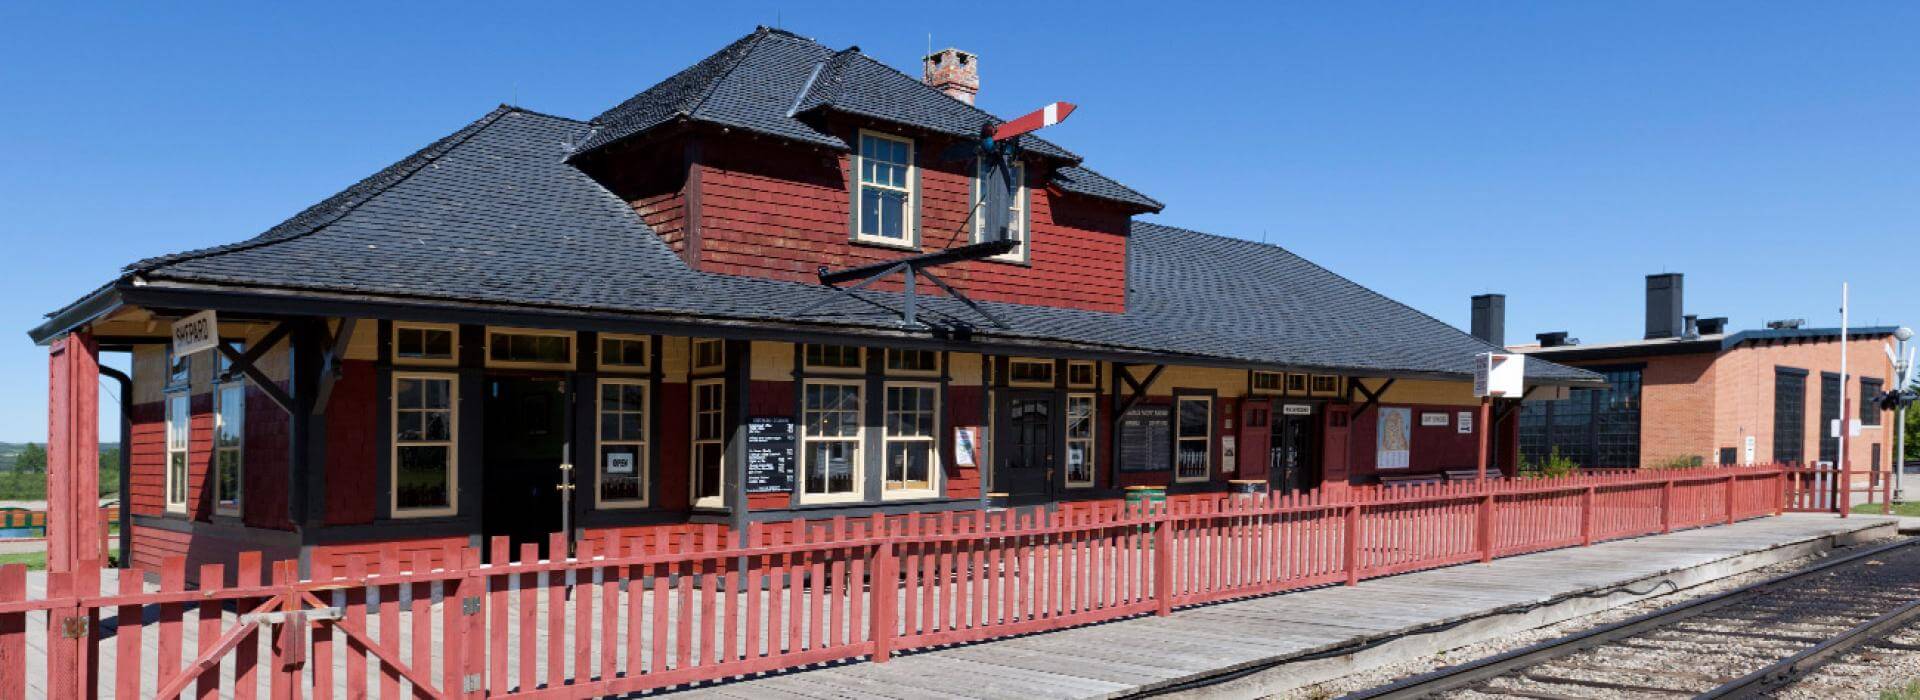 red and black train station with train tracks 